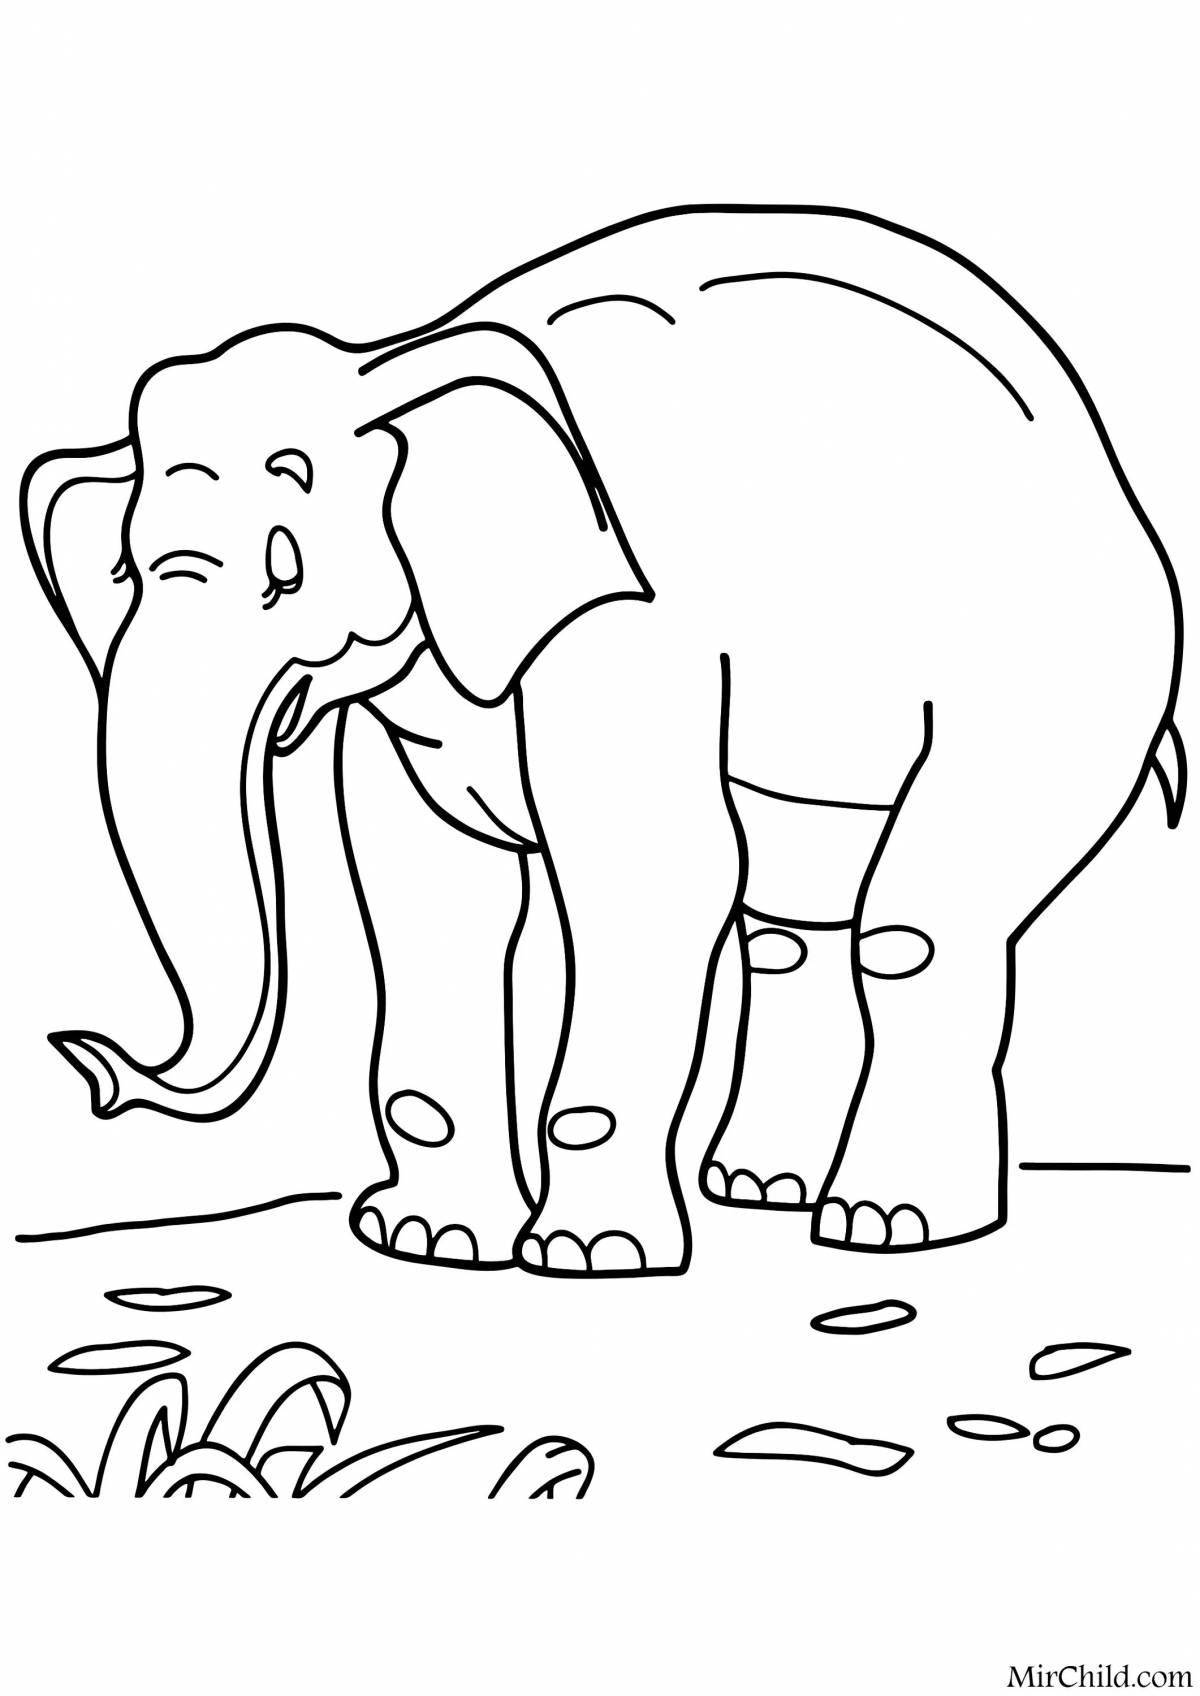 Incredible mammoth coloring book for kids